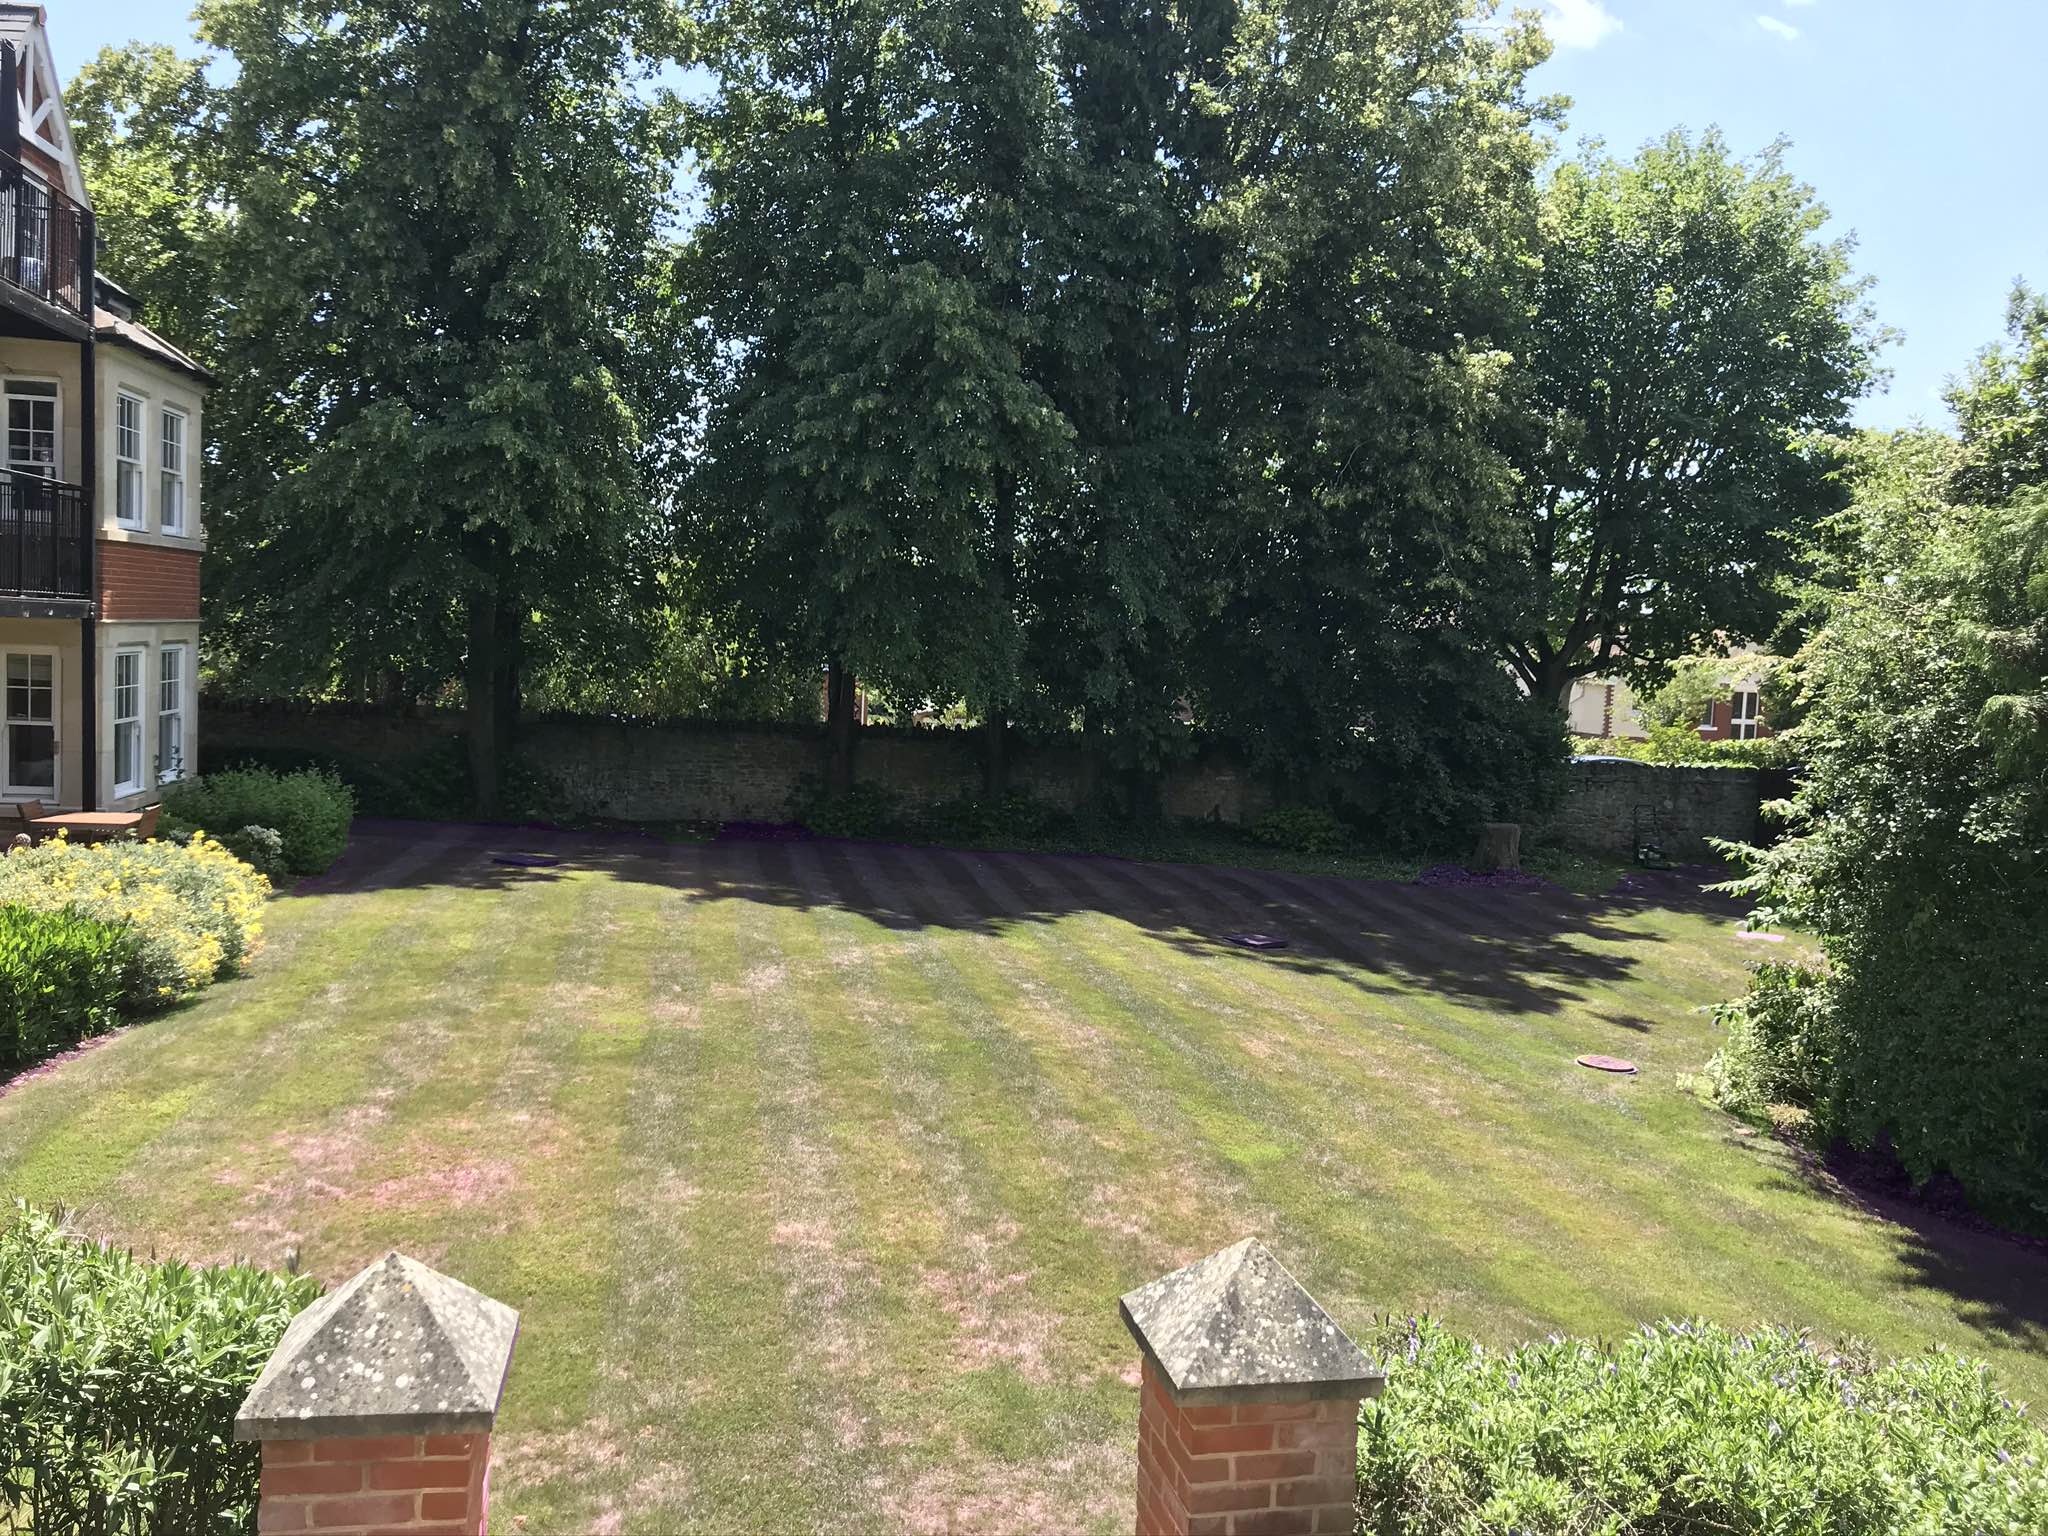 Westlecot House poor health lawn before fertiliser treatment by Johnson Lawn Care